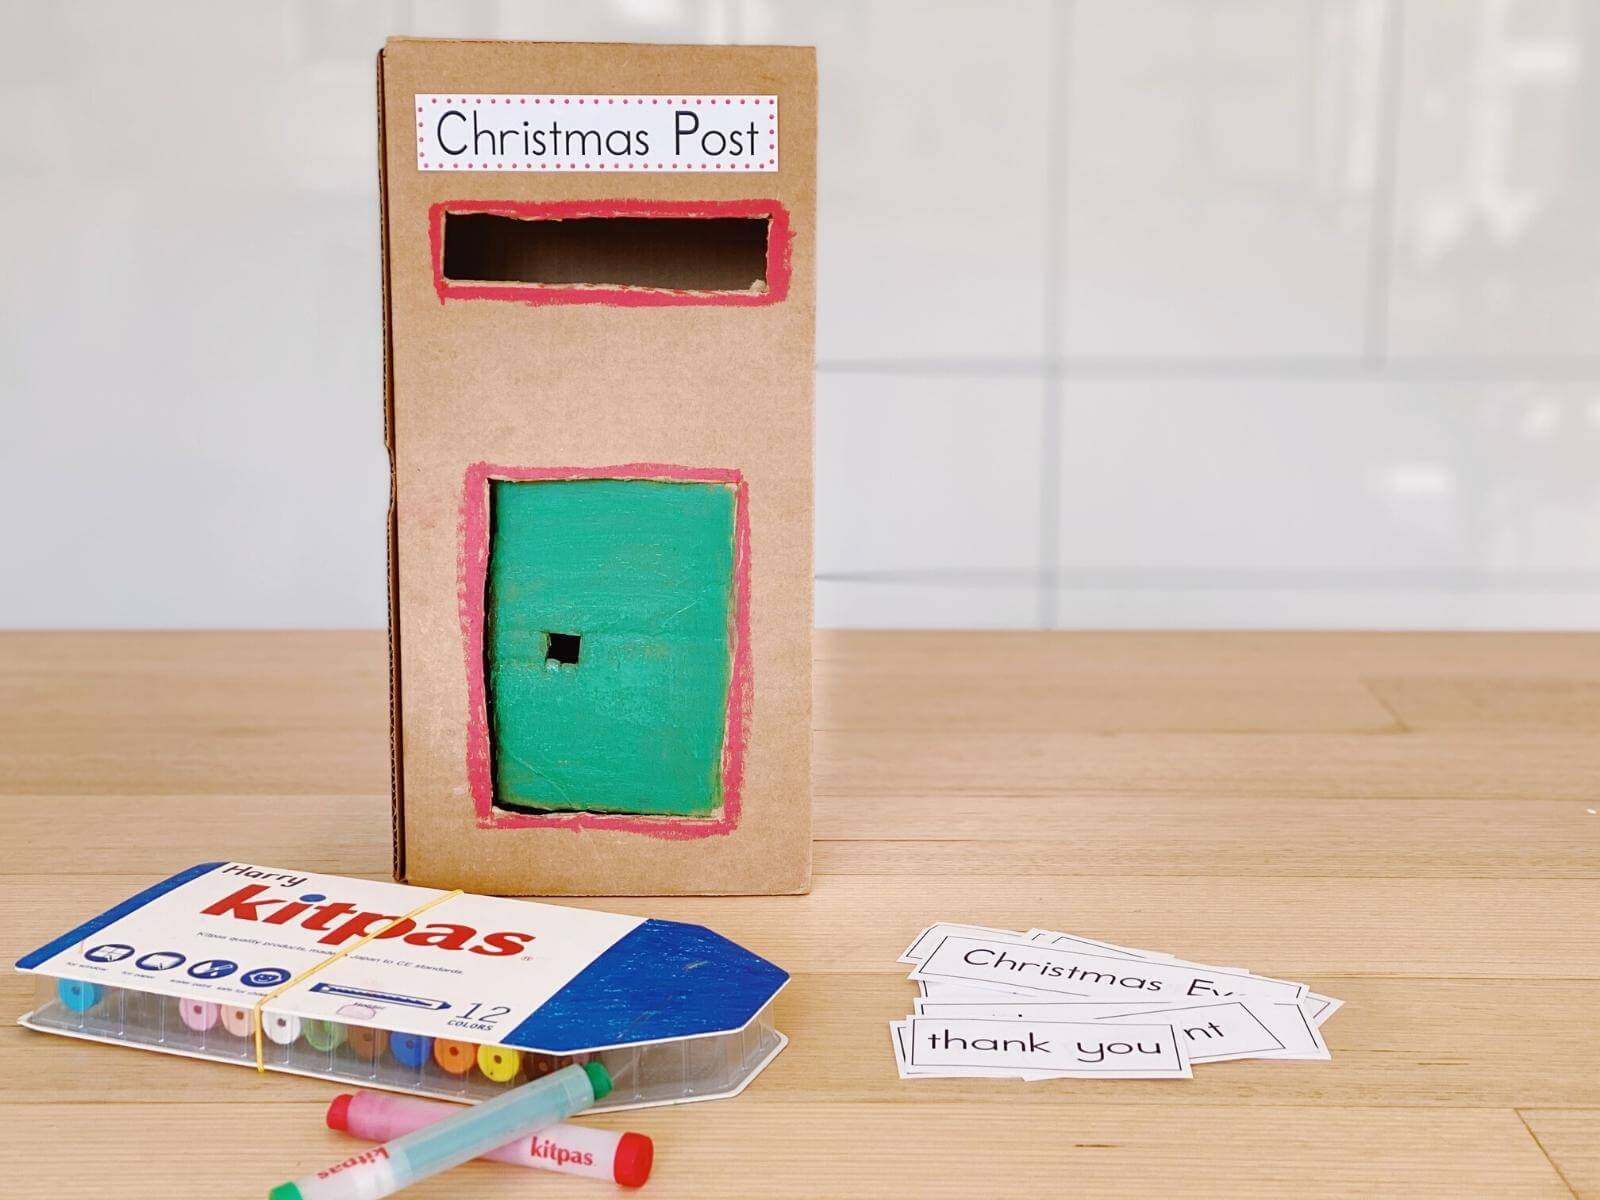 Create a Postbox out of recycled cardboard